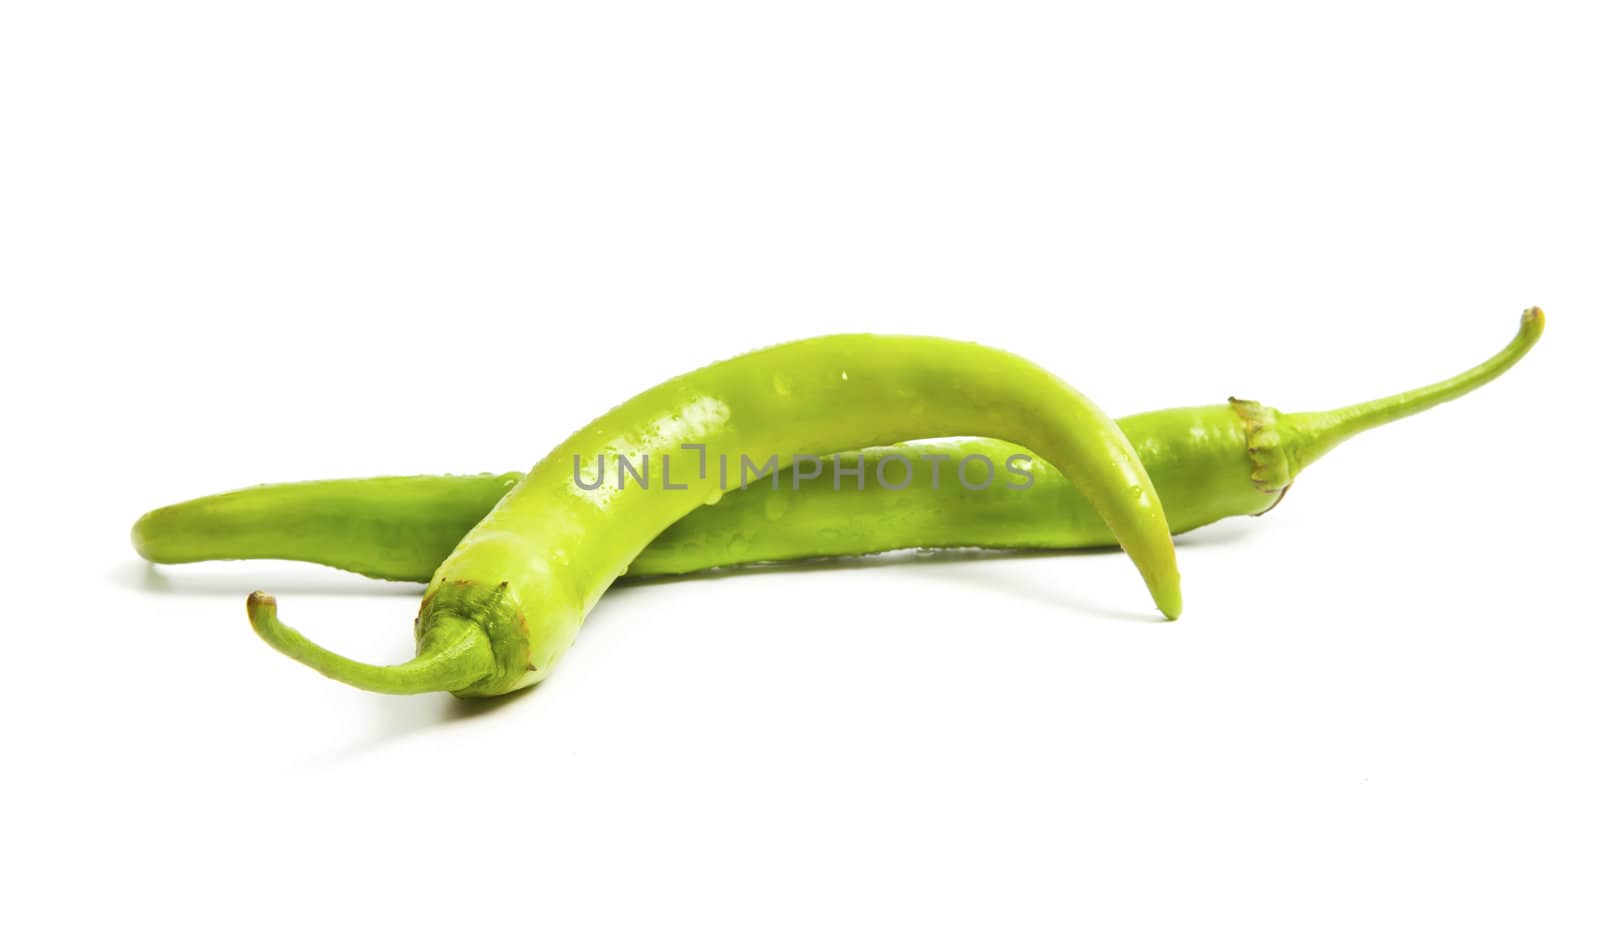 Only green chili pepper composition by RawGroup